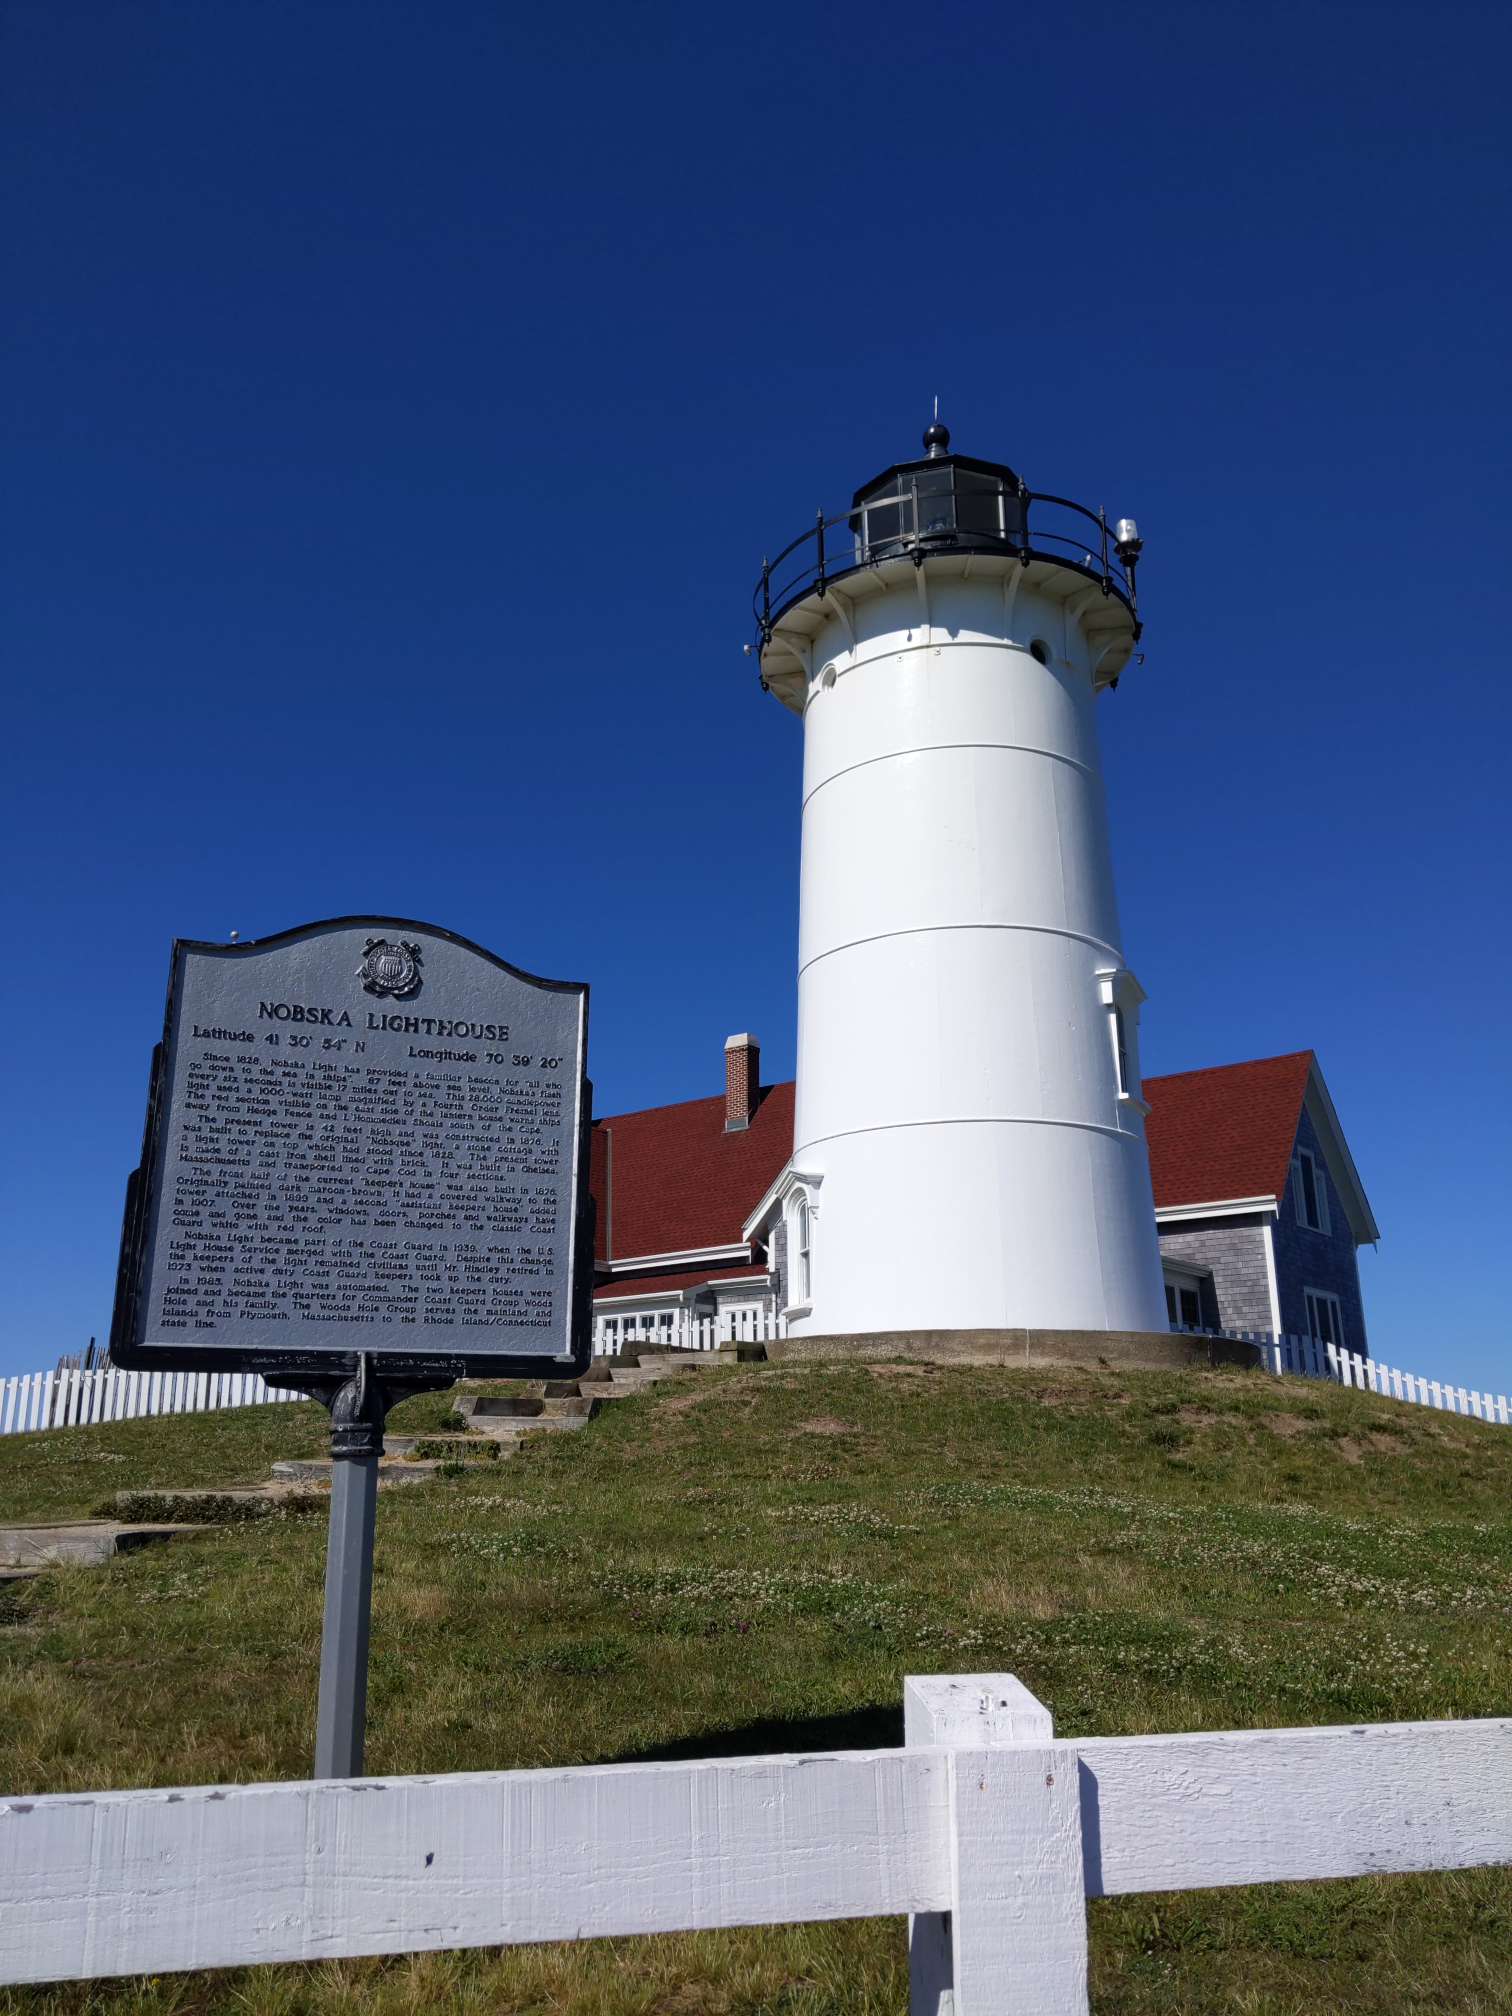 This is Nobska Lighthouse, opened in 1859. It is under partial reconstruction and wasn't really available to the public. It sits on the southern coast of Cape Cod, near the ferries to go to Martha's Vineyard.